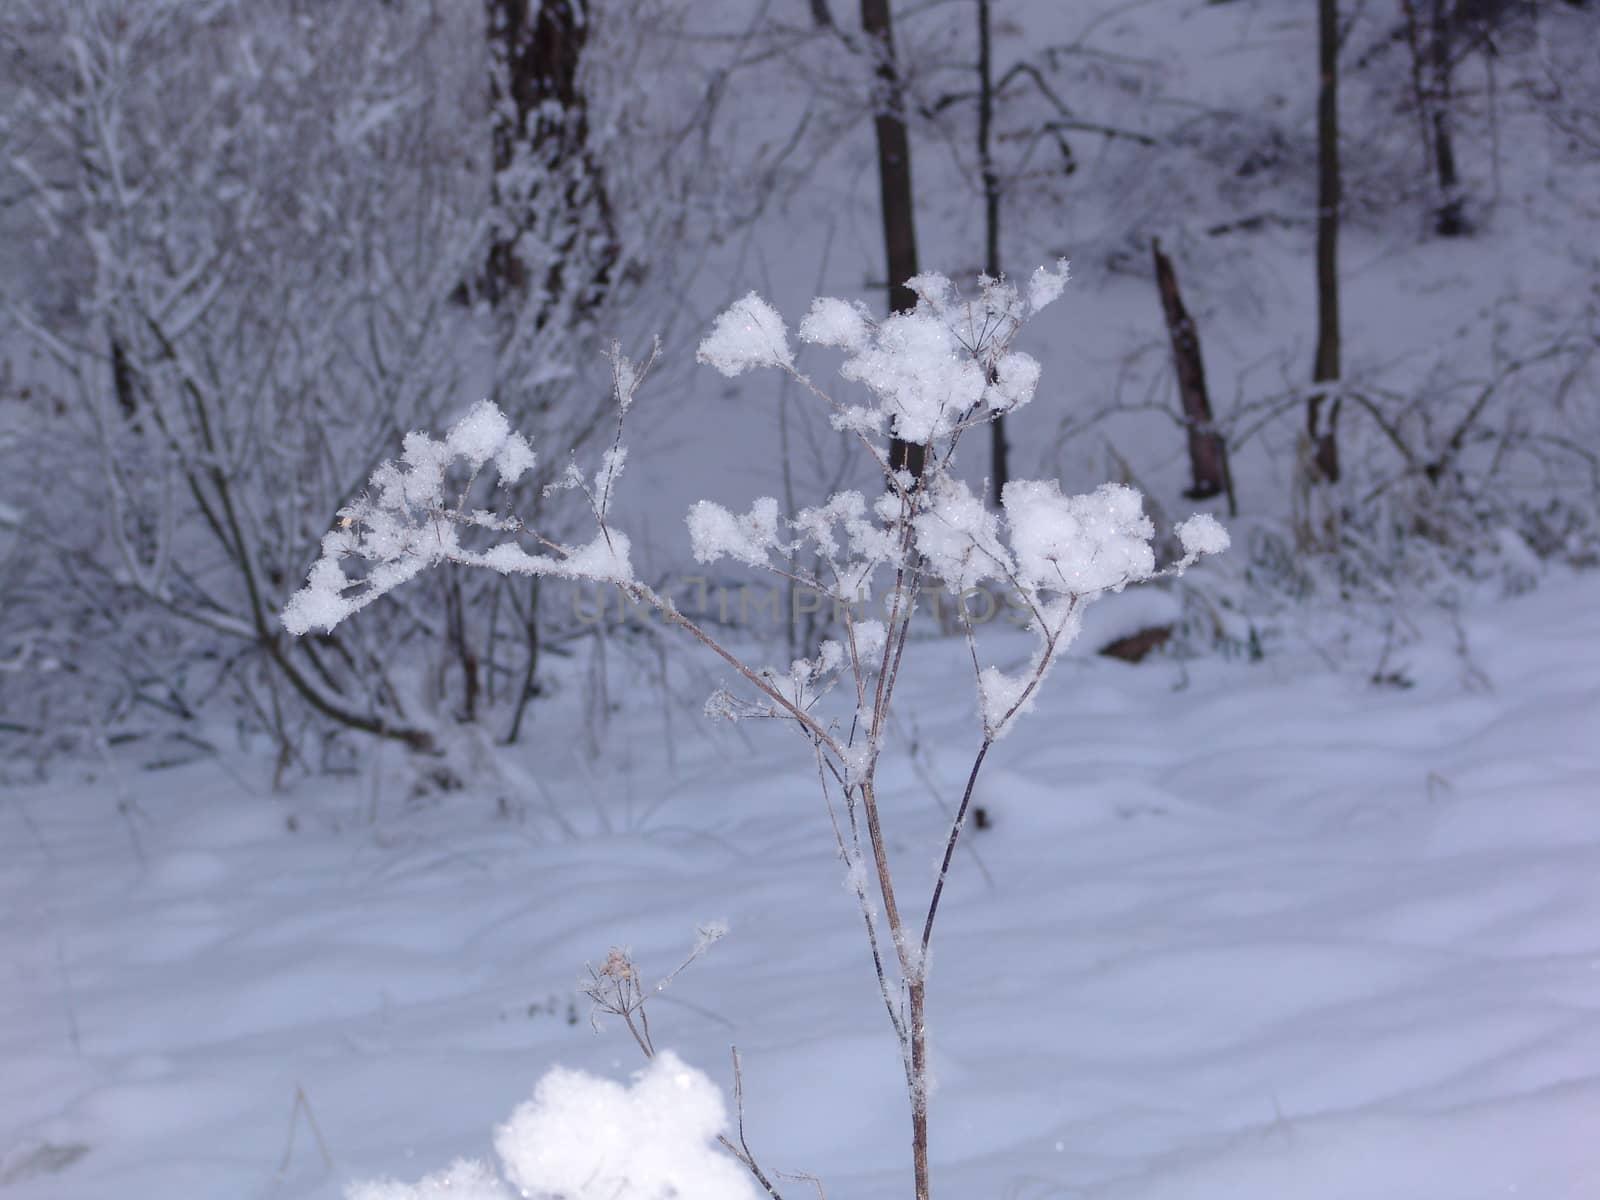 Bushes in winter forest by elena_vz